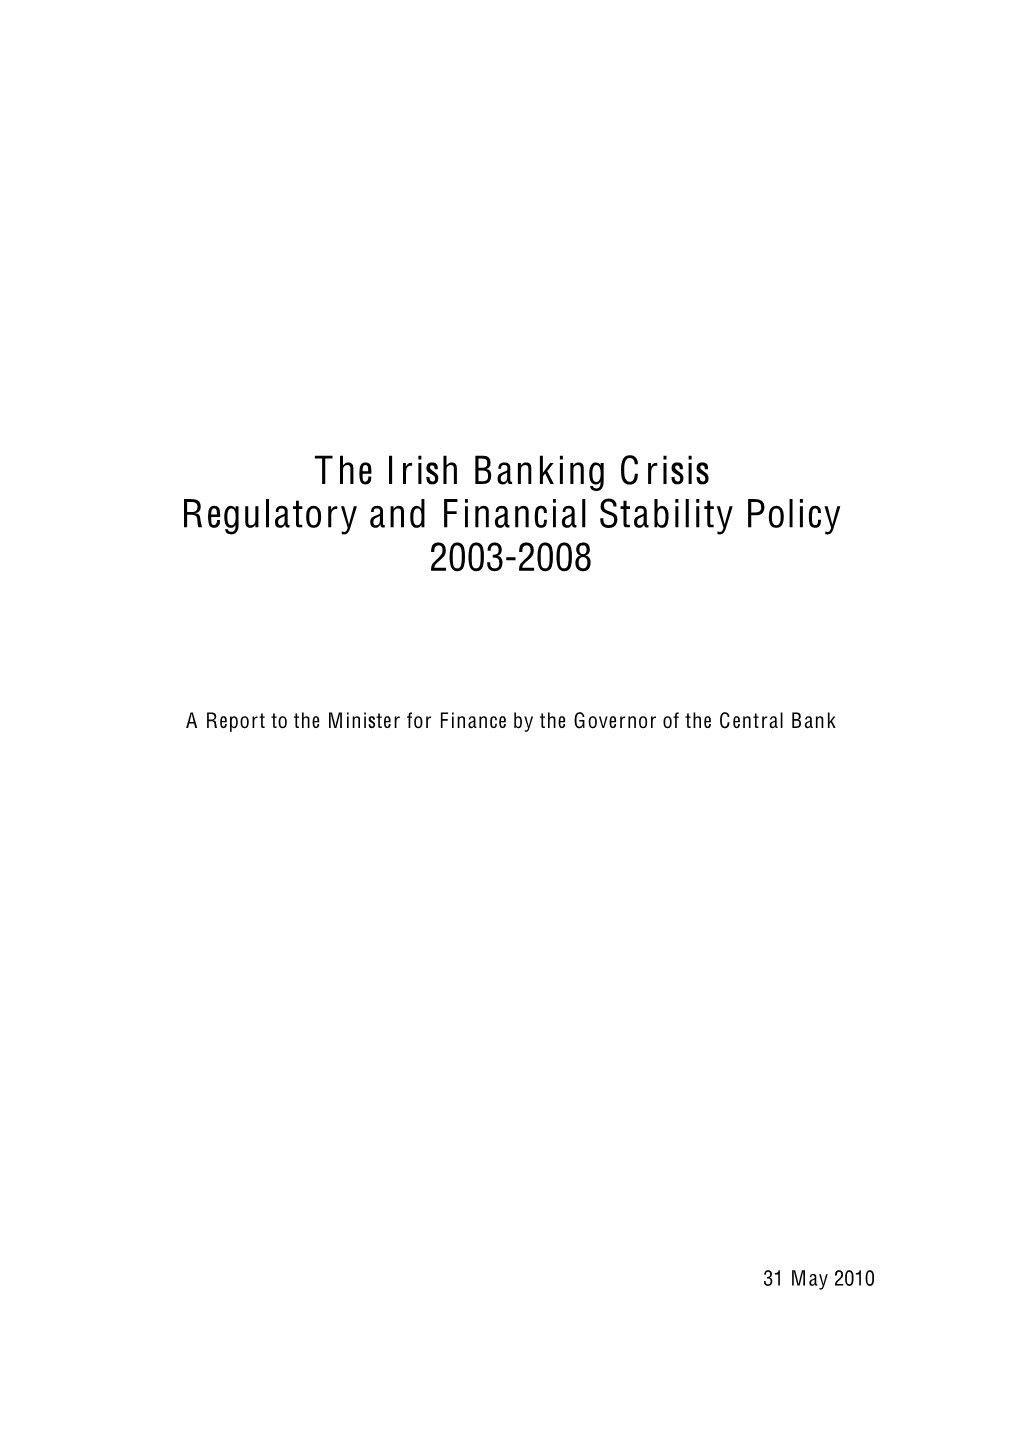 The Irish Banking Crisis Regulatory and Financial Stability Policy